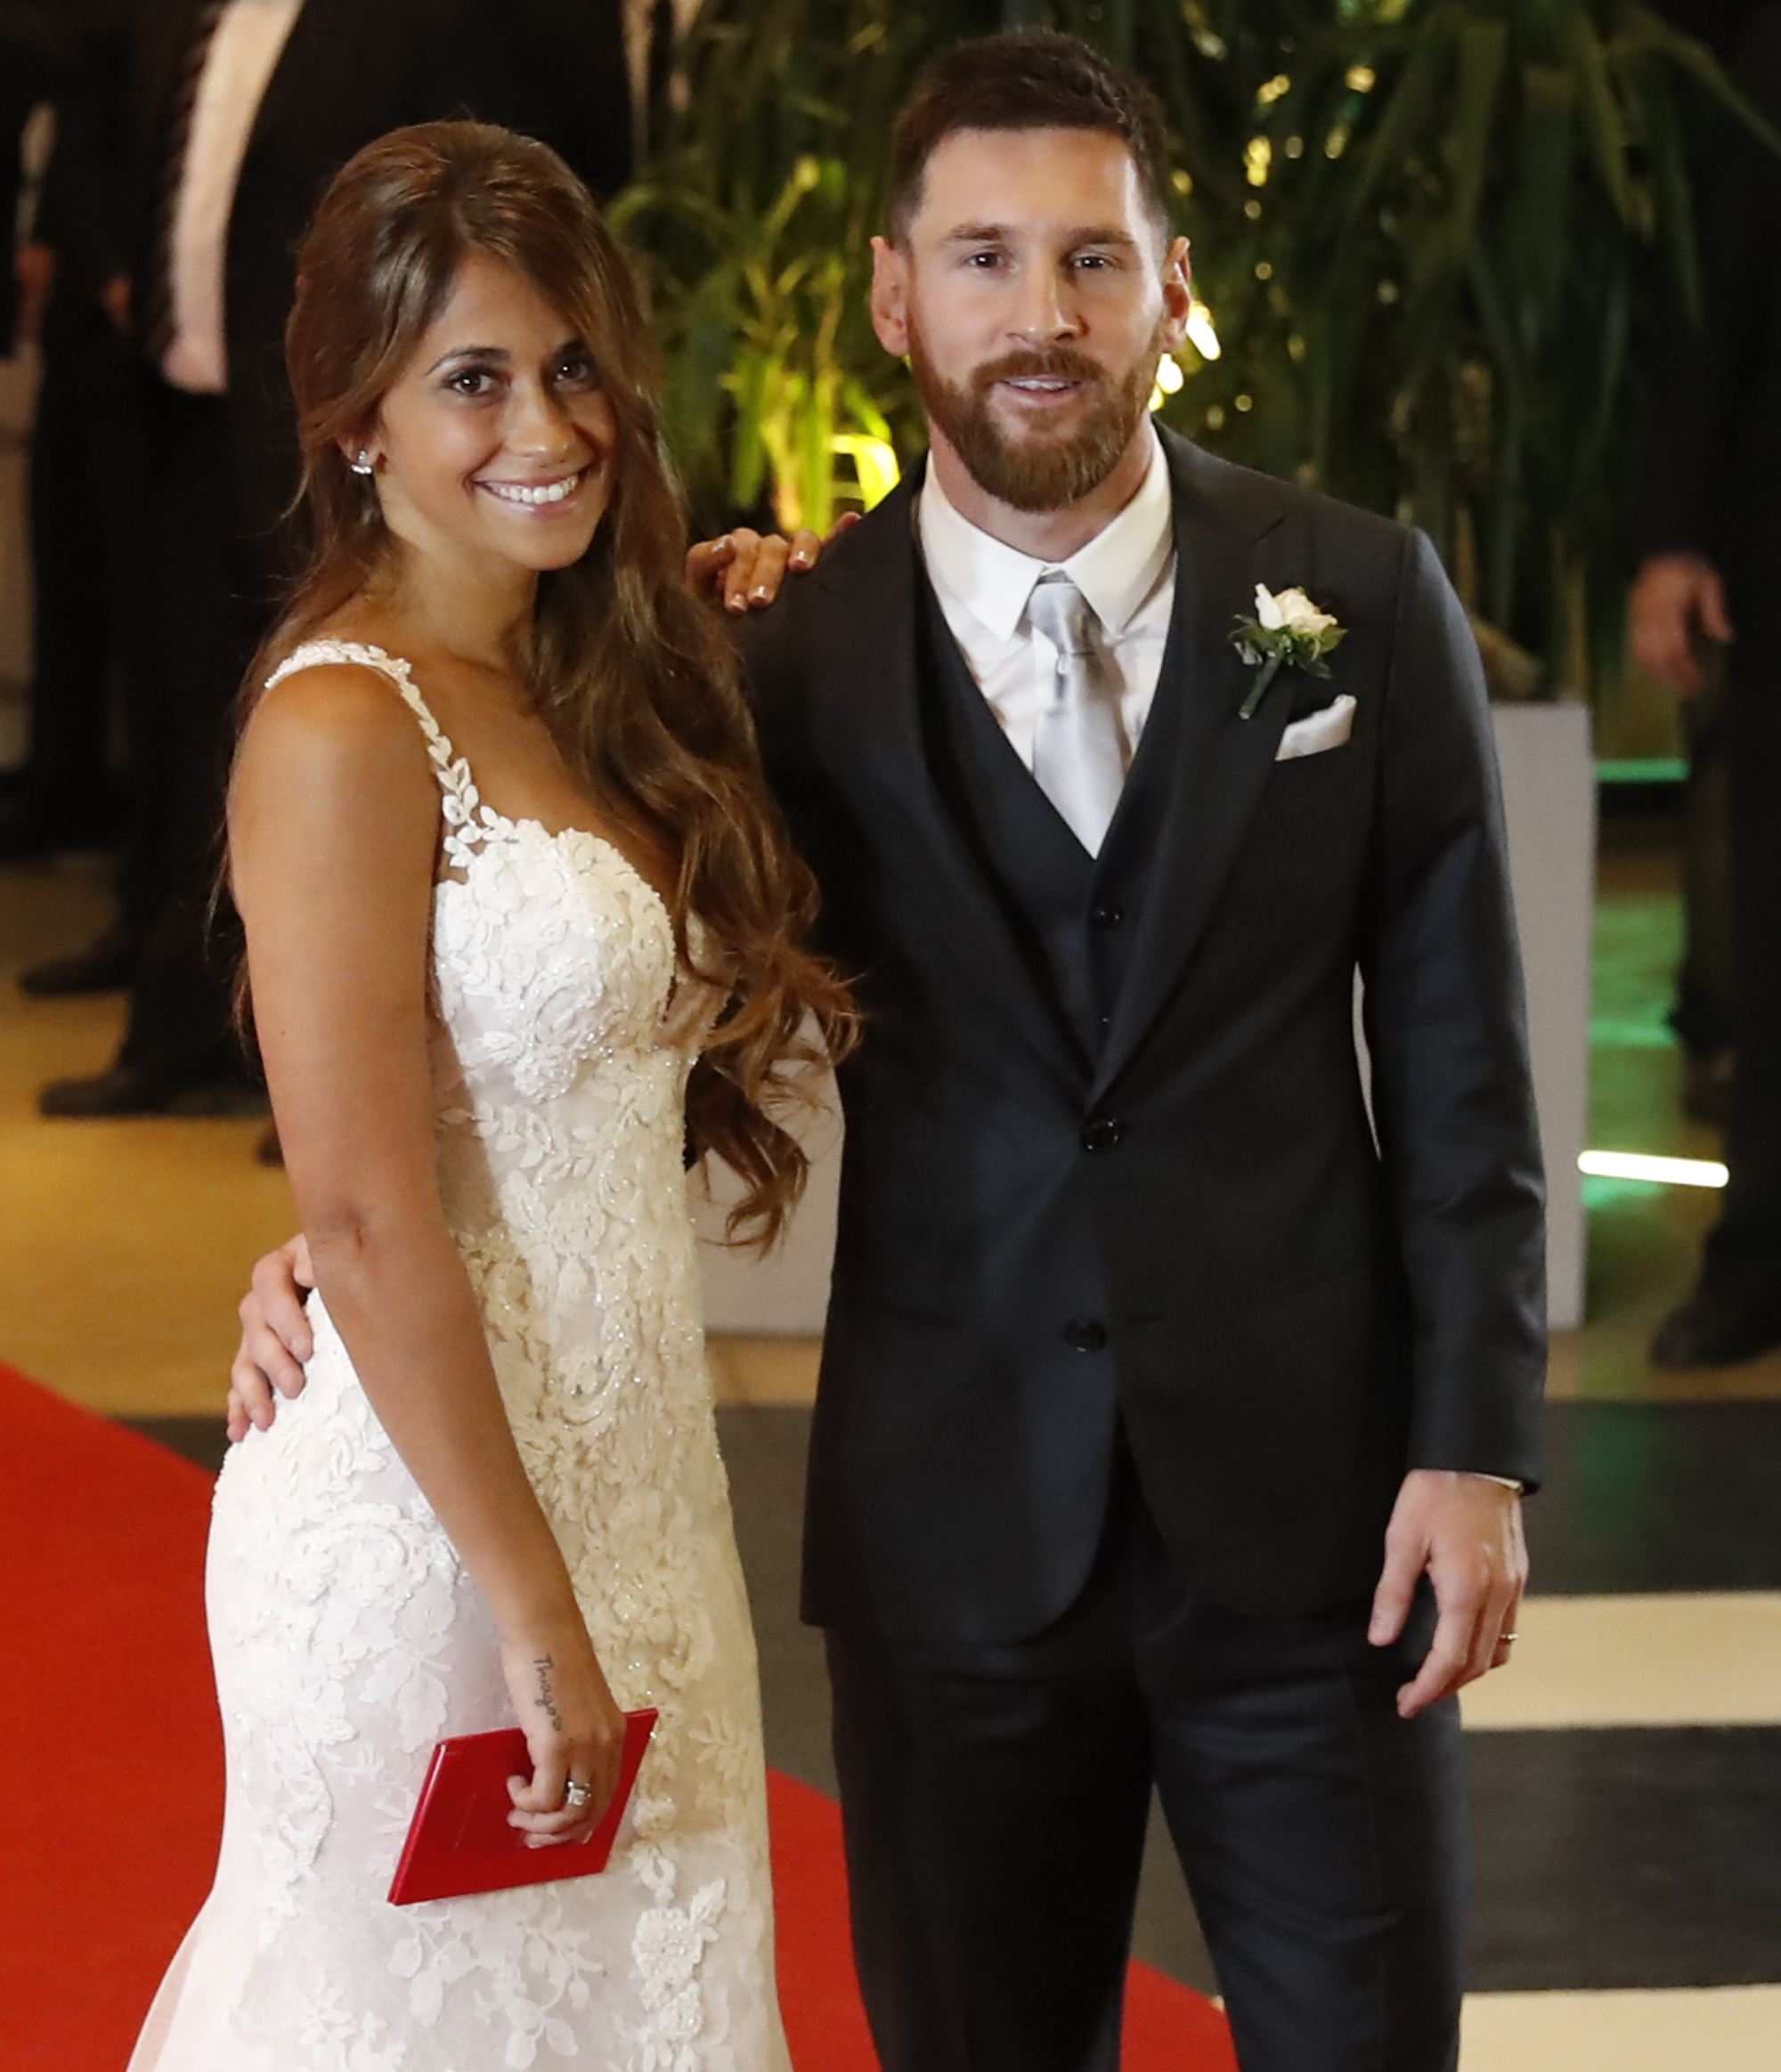 Who Is Lionel Messi S Gorgeous Fashionista Wife Antonela Roccuzzo The 2022 World Cup Champ And